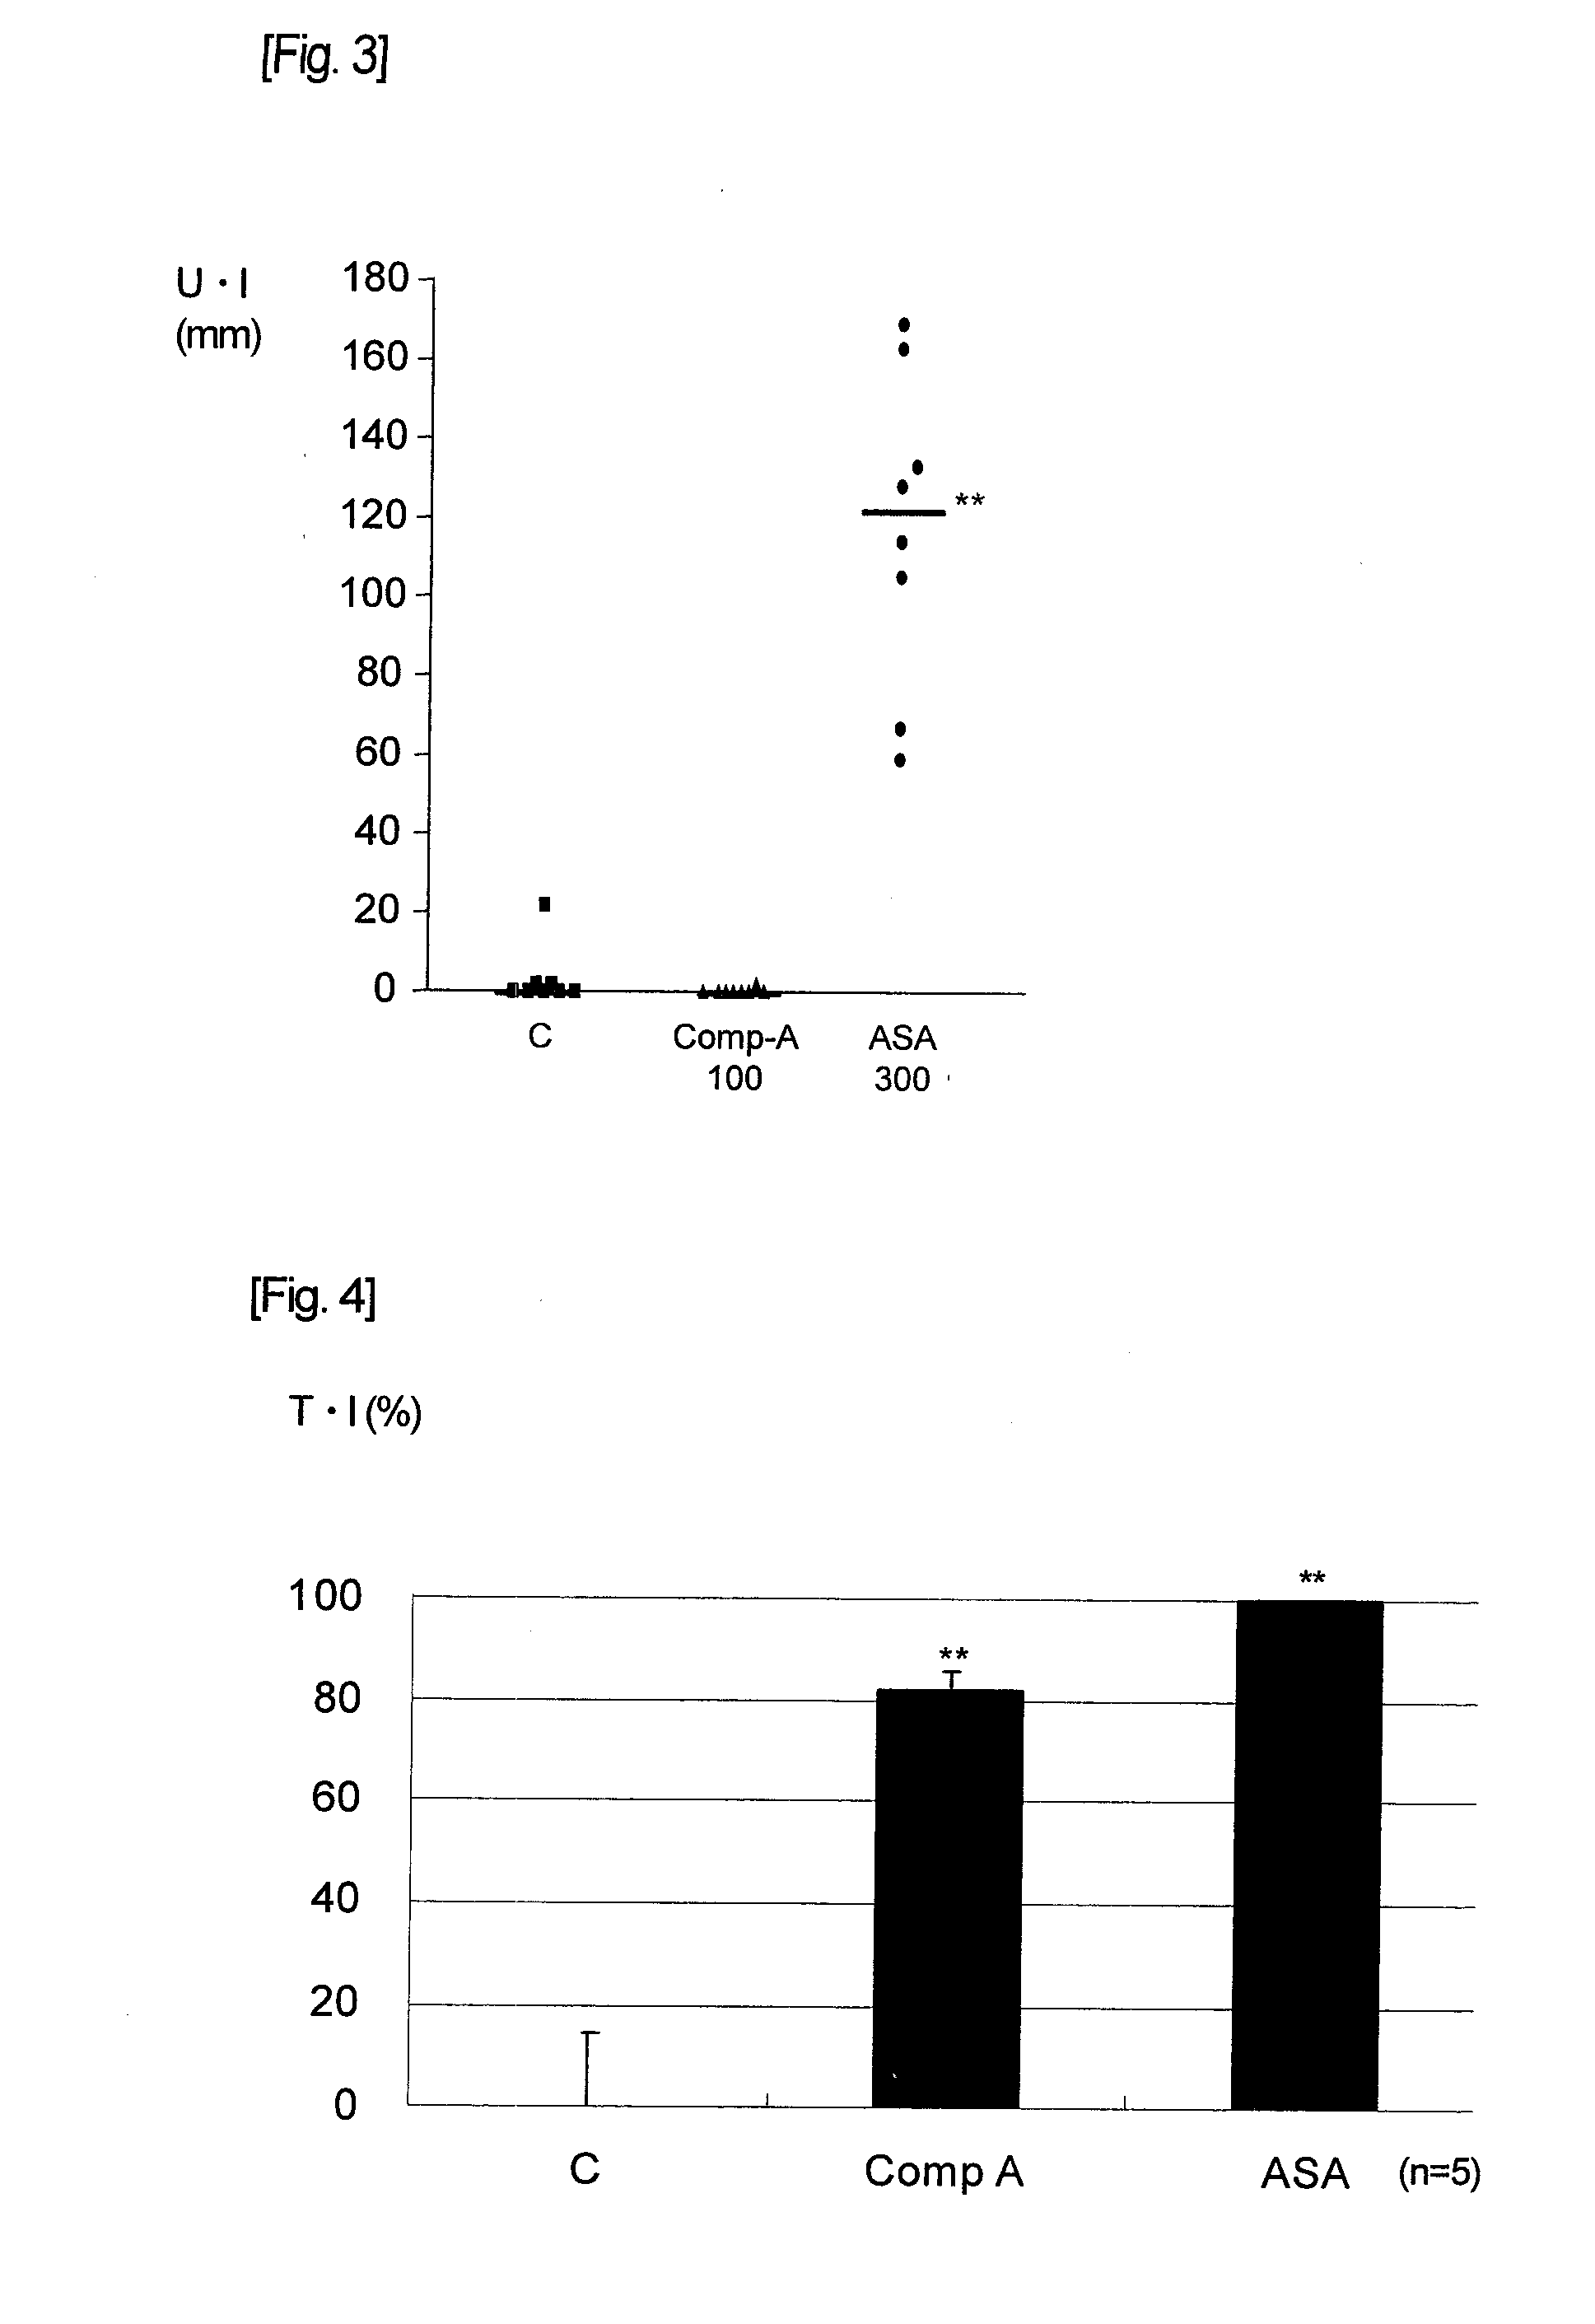 Agent for preventing and/or treating vascular diseases